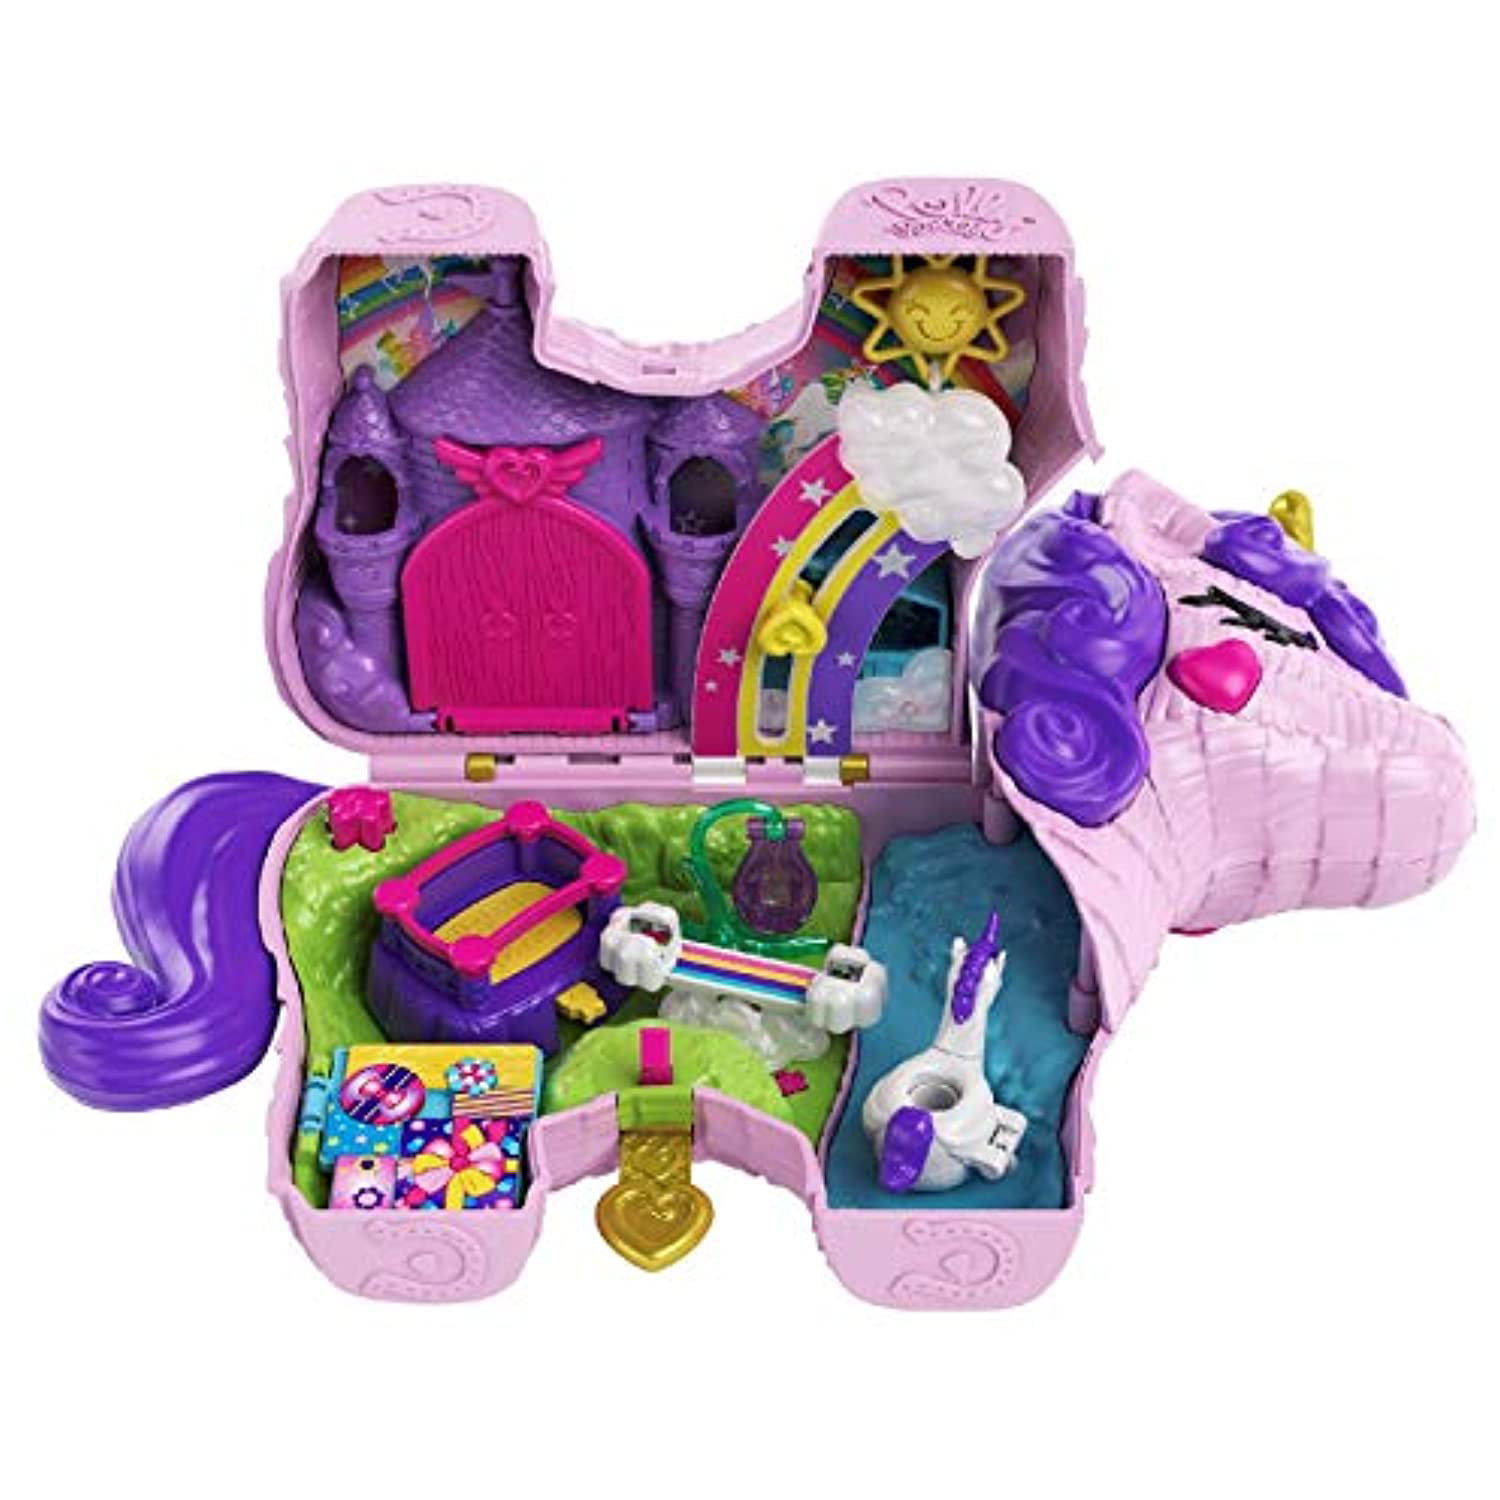 5 Reveals & 13 Related Accessories ​Polly Pocket Elephant Adventure Compact Animal Theme with Micro Polly & Bella Dolls